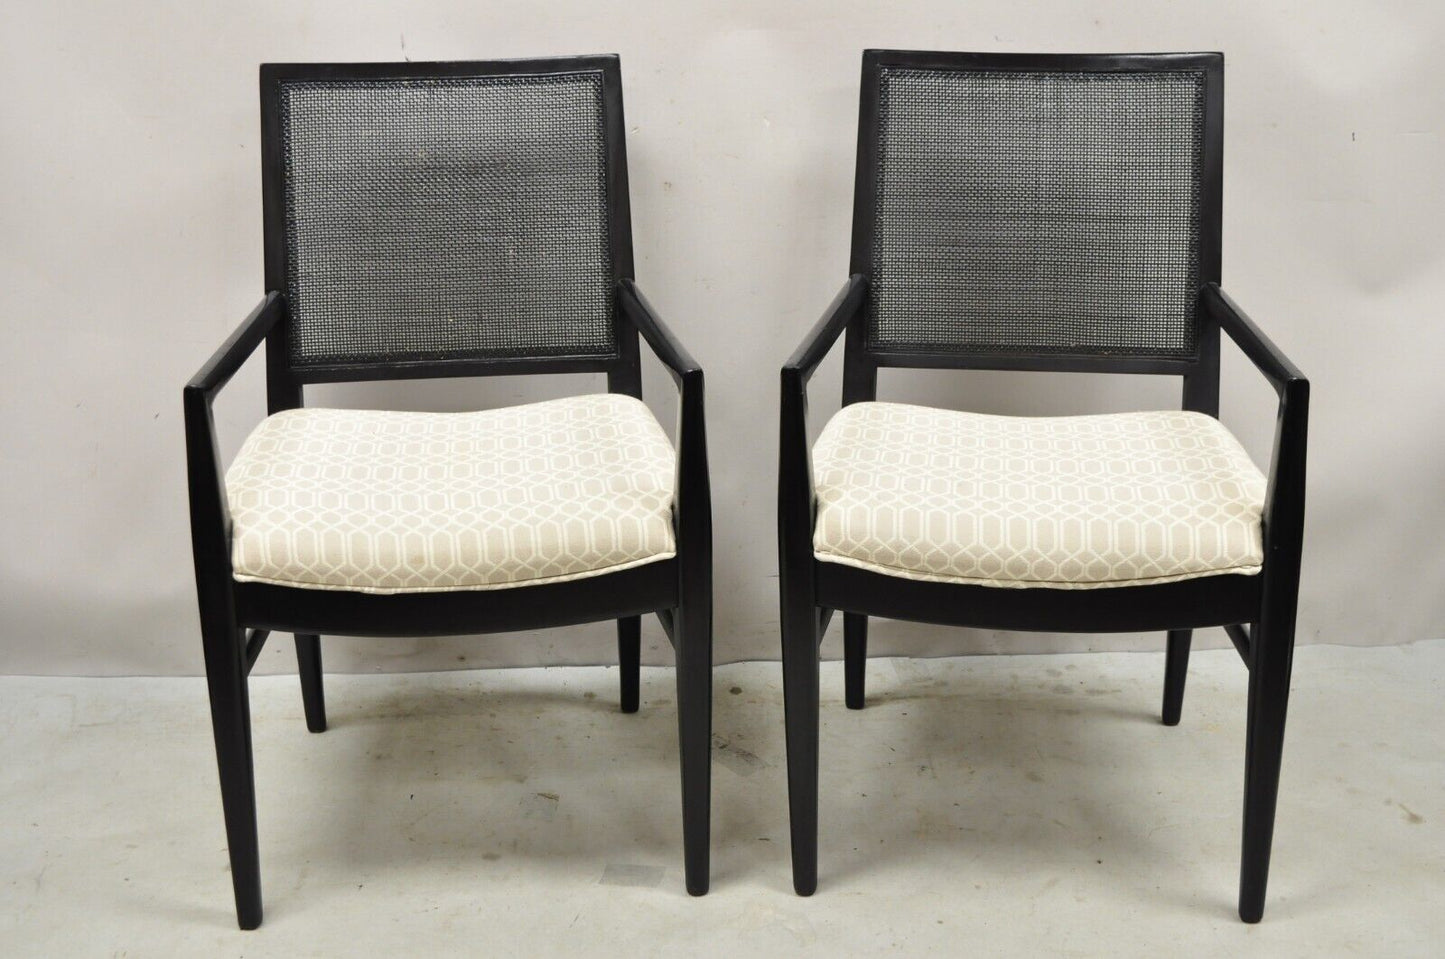 Vintage Mid Century Modern Paul McCobb Style Black Cane Dining Chairs - Set of 6